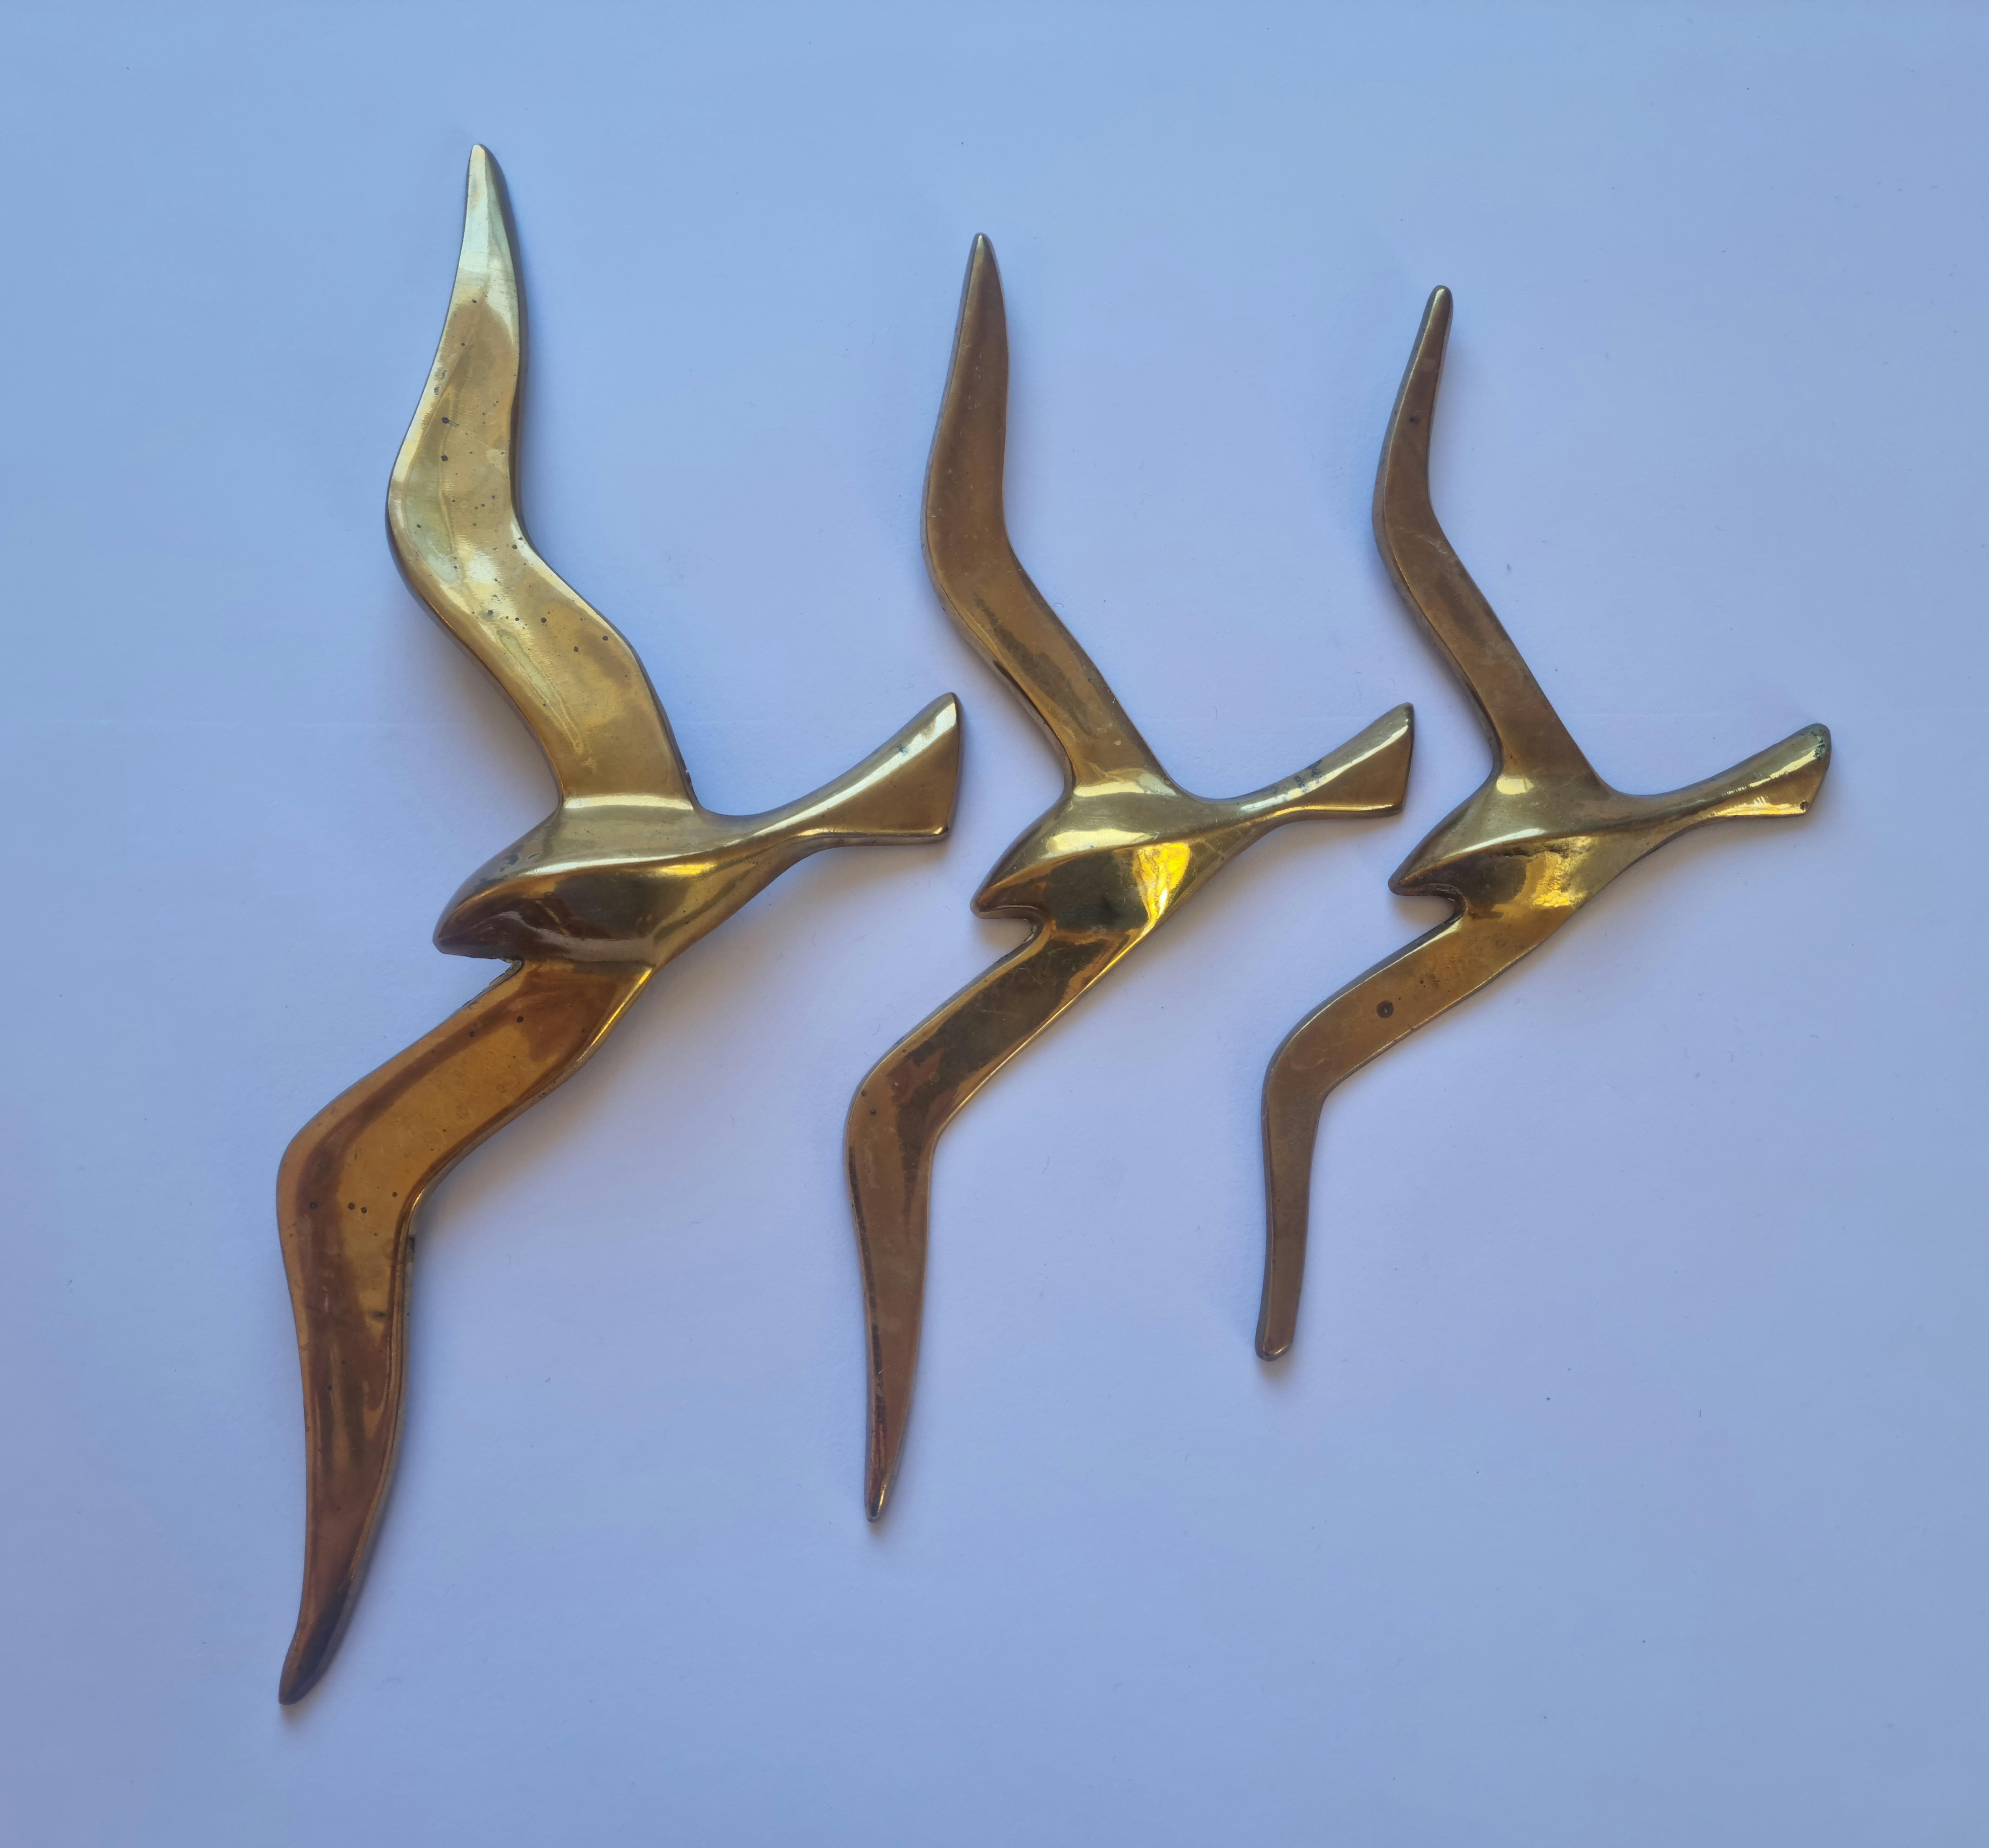 Set of Three Wall Brass Decor Sculptures of Seagulls, Austria, 1960s For Sale 4